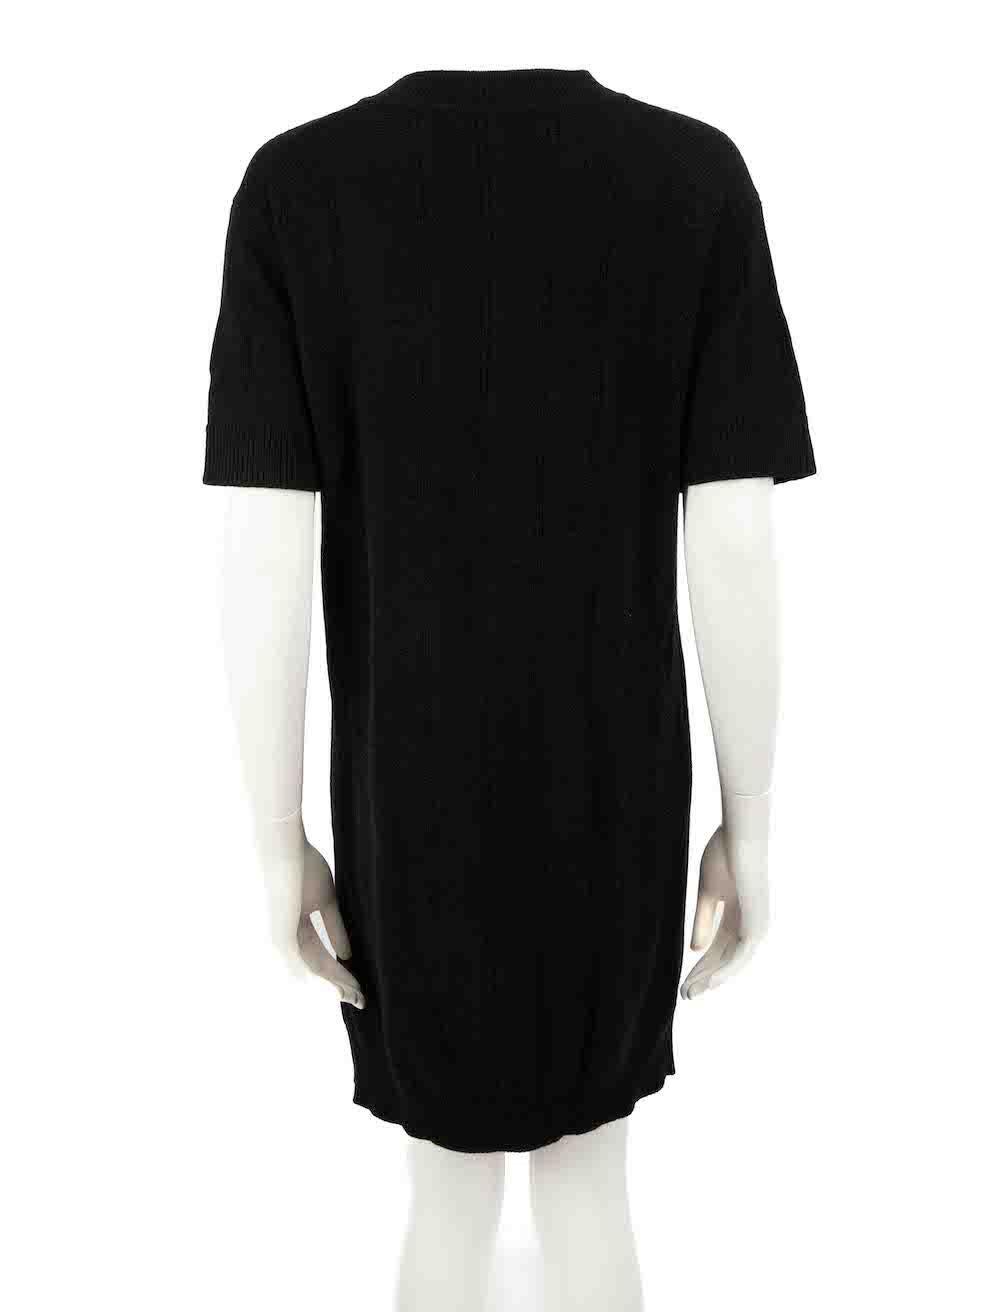 Hermès Black Wool Round Neck Knit Dress Size S In Excellent Condition For Sale In London, GB